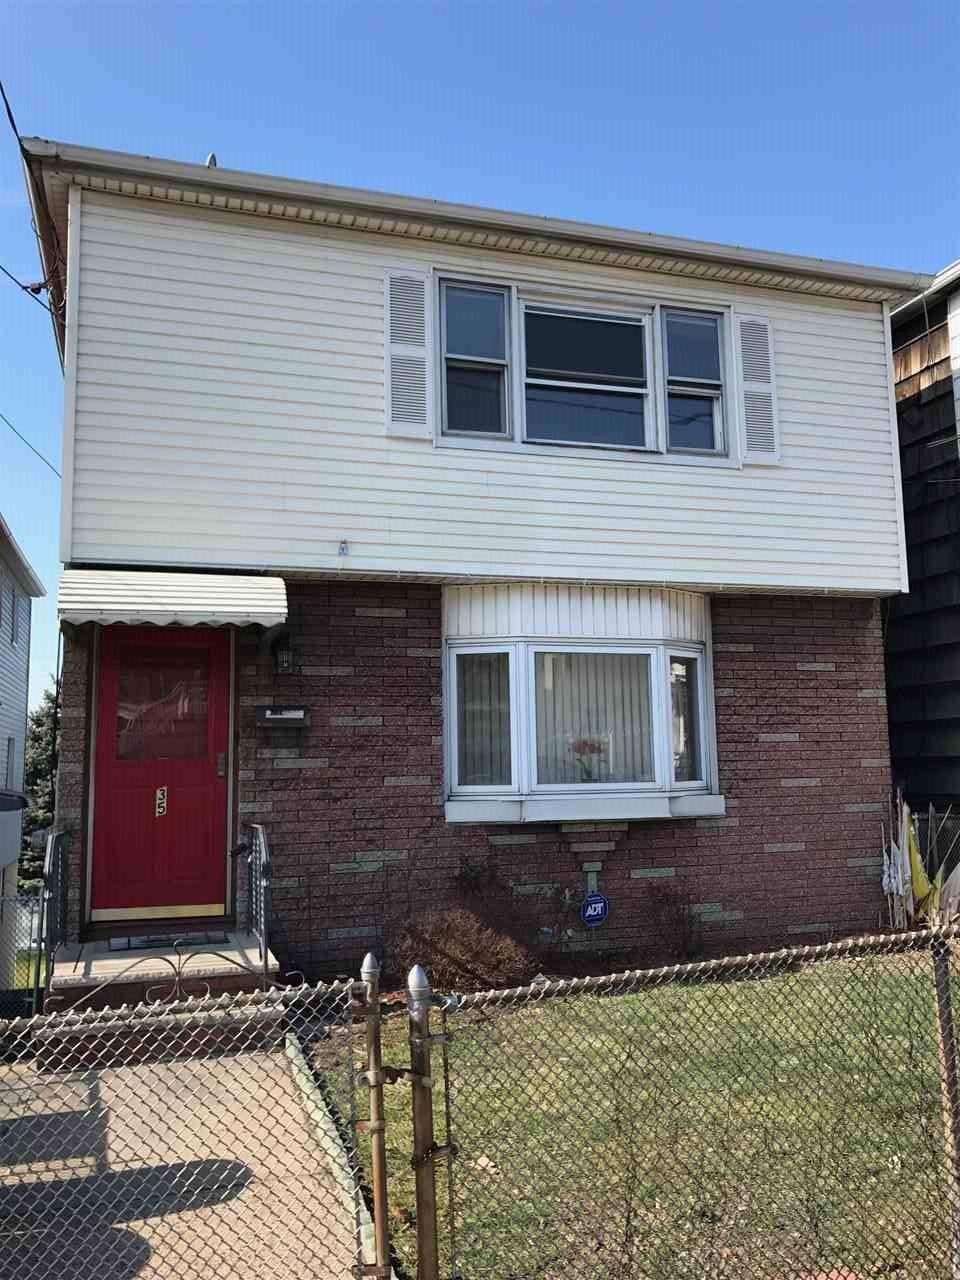 Income producing 2 family with finished basement - Multi-Family The Heights New Jersey